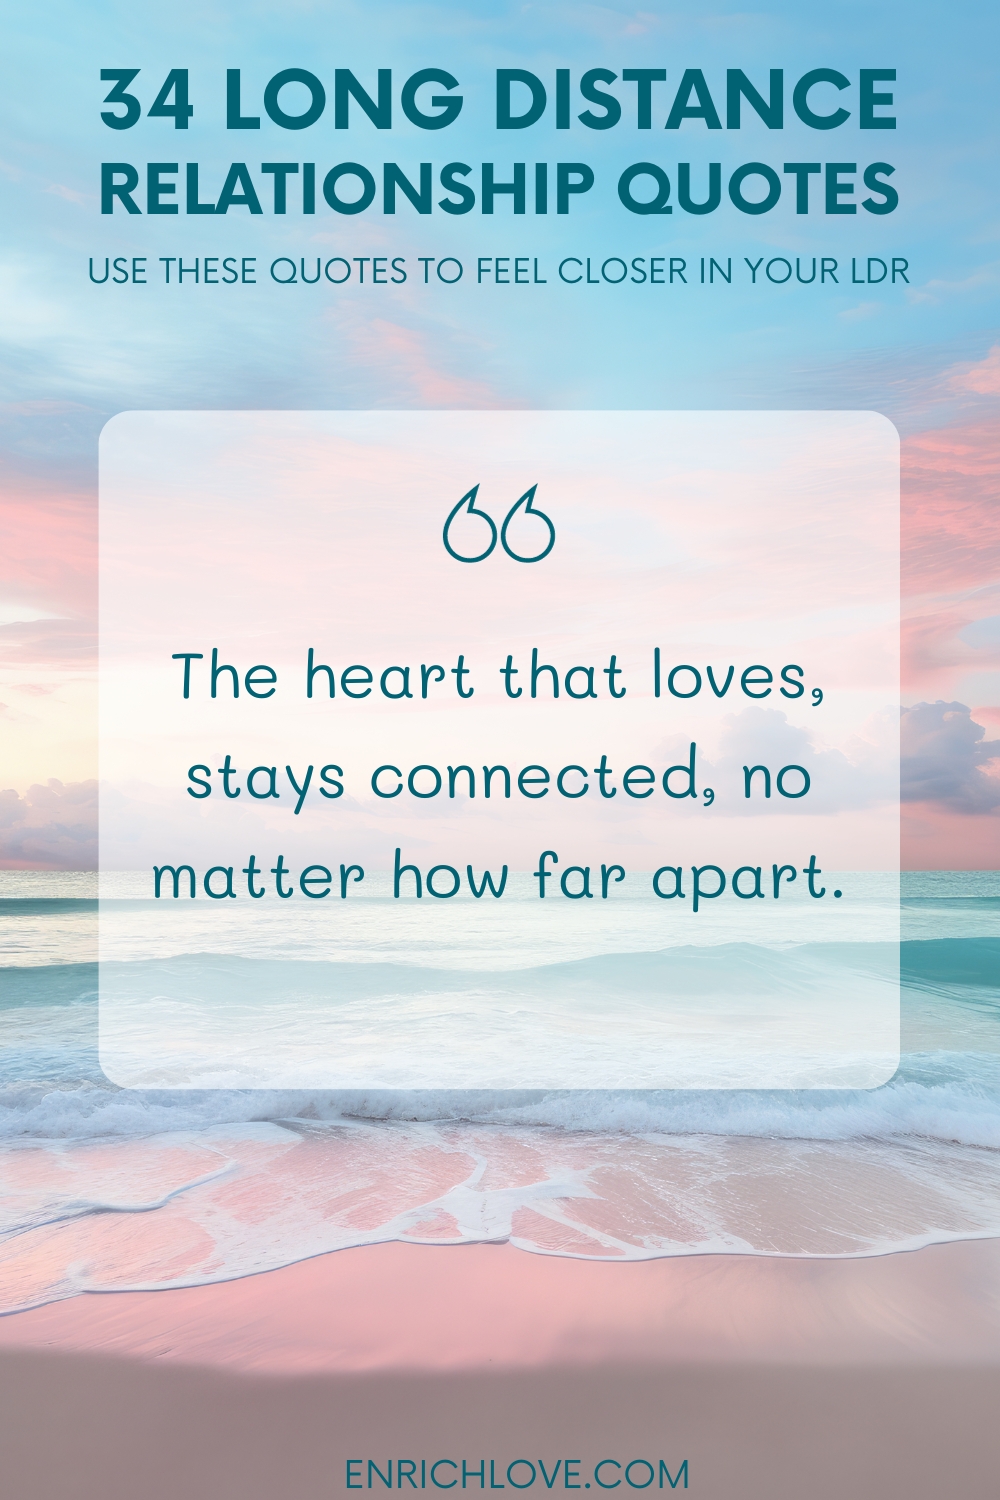 34 Long Distance Relationship Quotes - The heart that loves, stays connected, no matter how far apart.